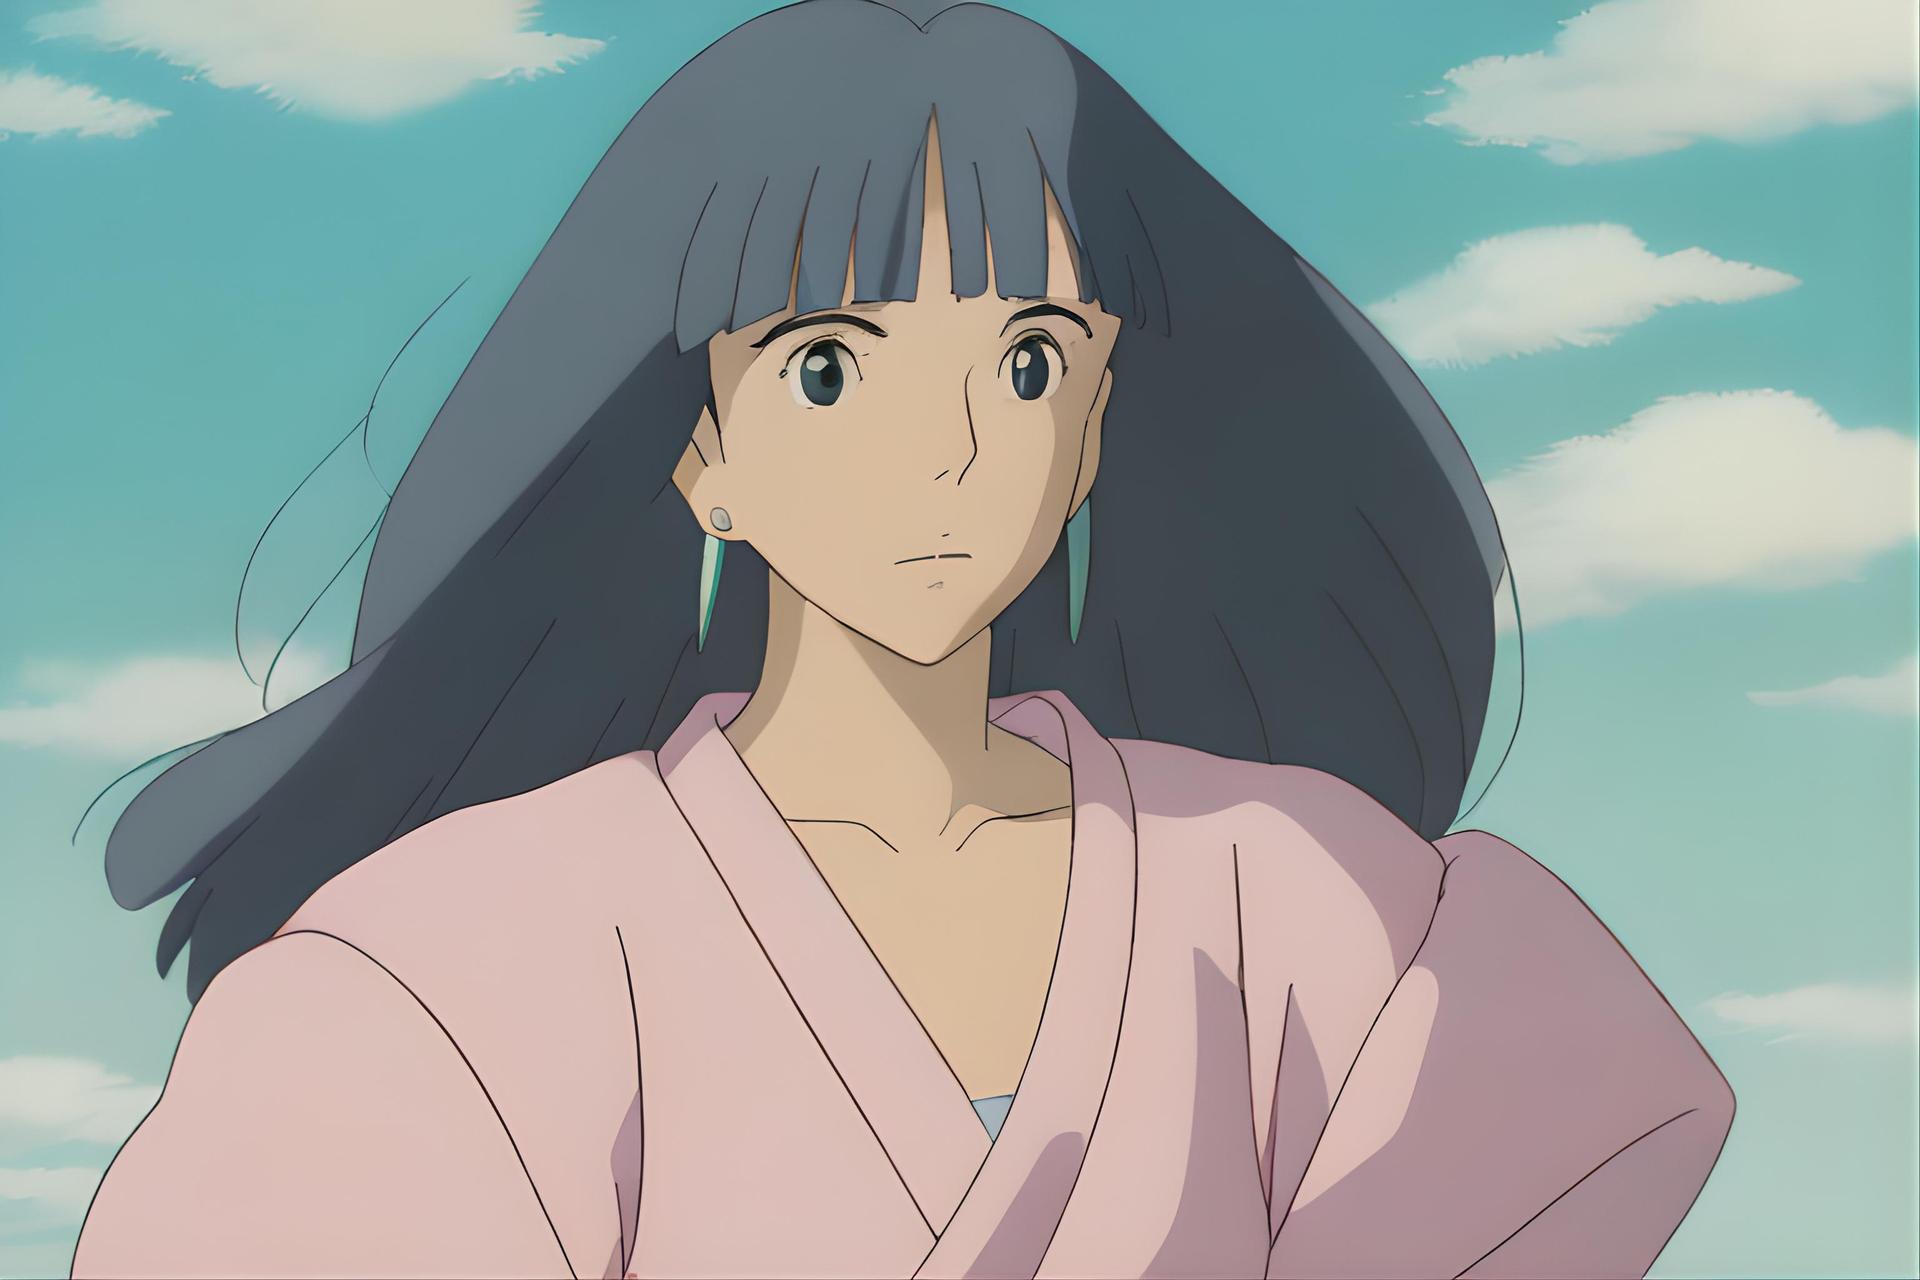 ai generated Studio Ghibli image depicting animated image of a young woman with long dark hair and large expressive eyes, wearing a soft pink traditional kimono, set against a backdrop of a clear blue sky with light, wispy clouds